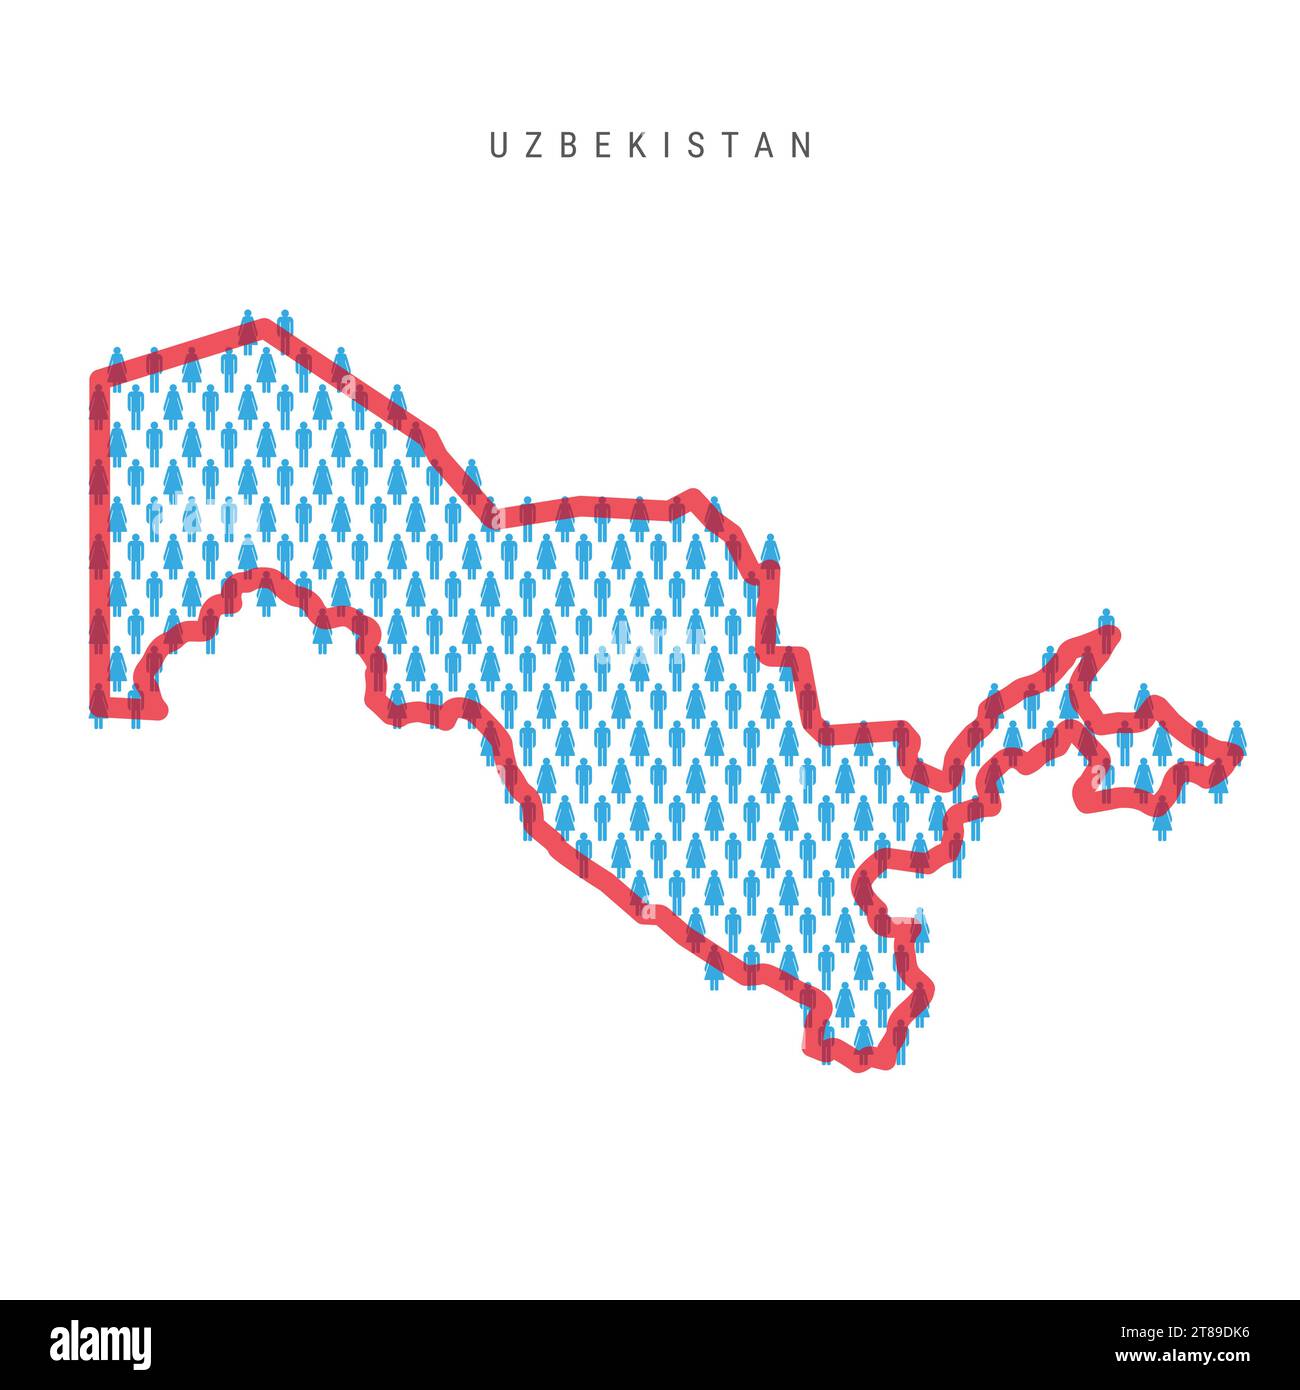 Uzbekistan population map. Stick figures Uzbek people map with bold red translucent country border. Pattern of men and women icons. Isolated vector il Stock Vector